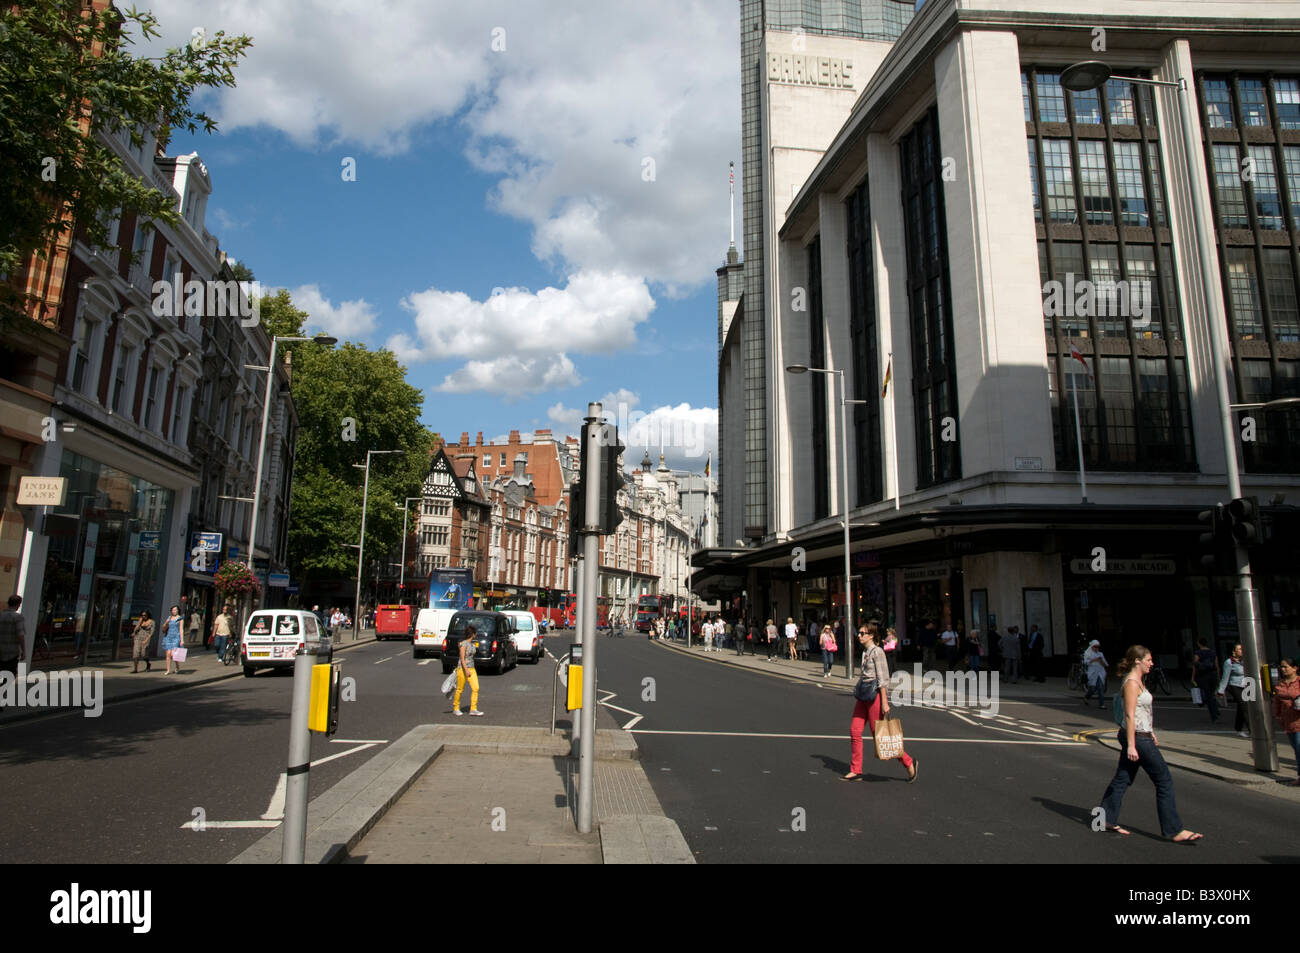 New shared space road layout in Kensington High Street London England ...